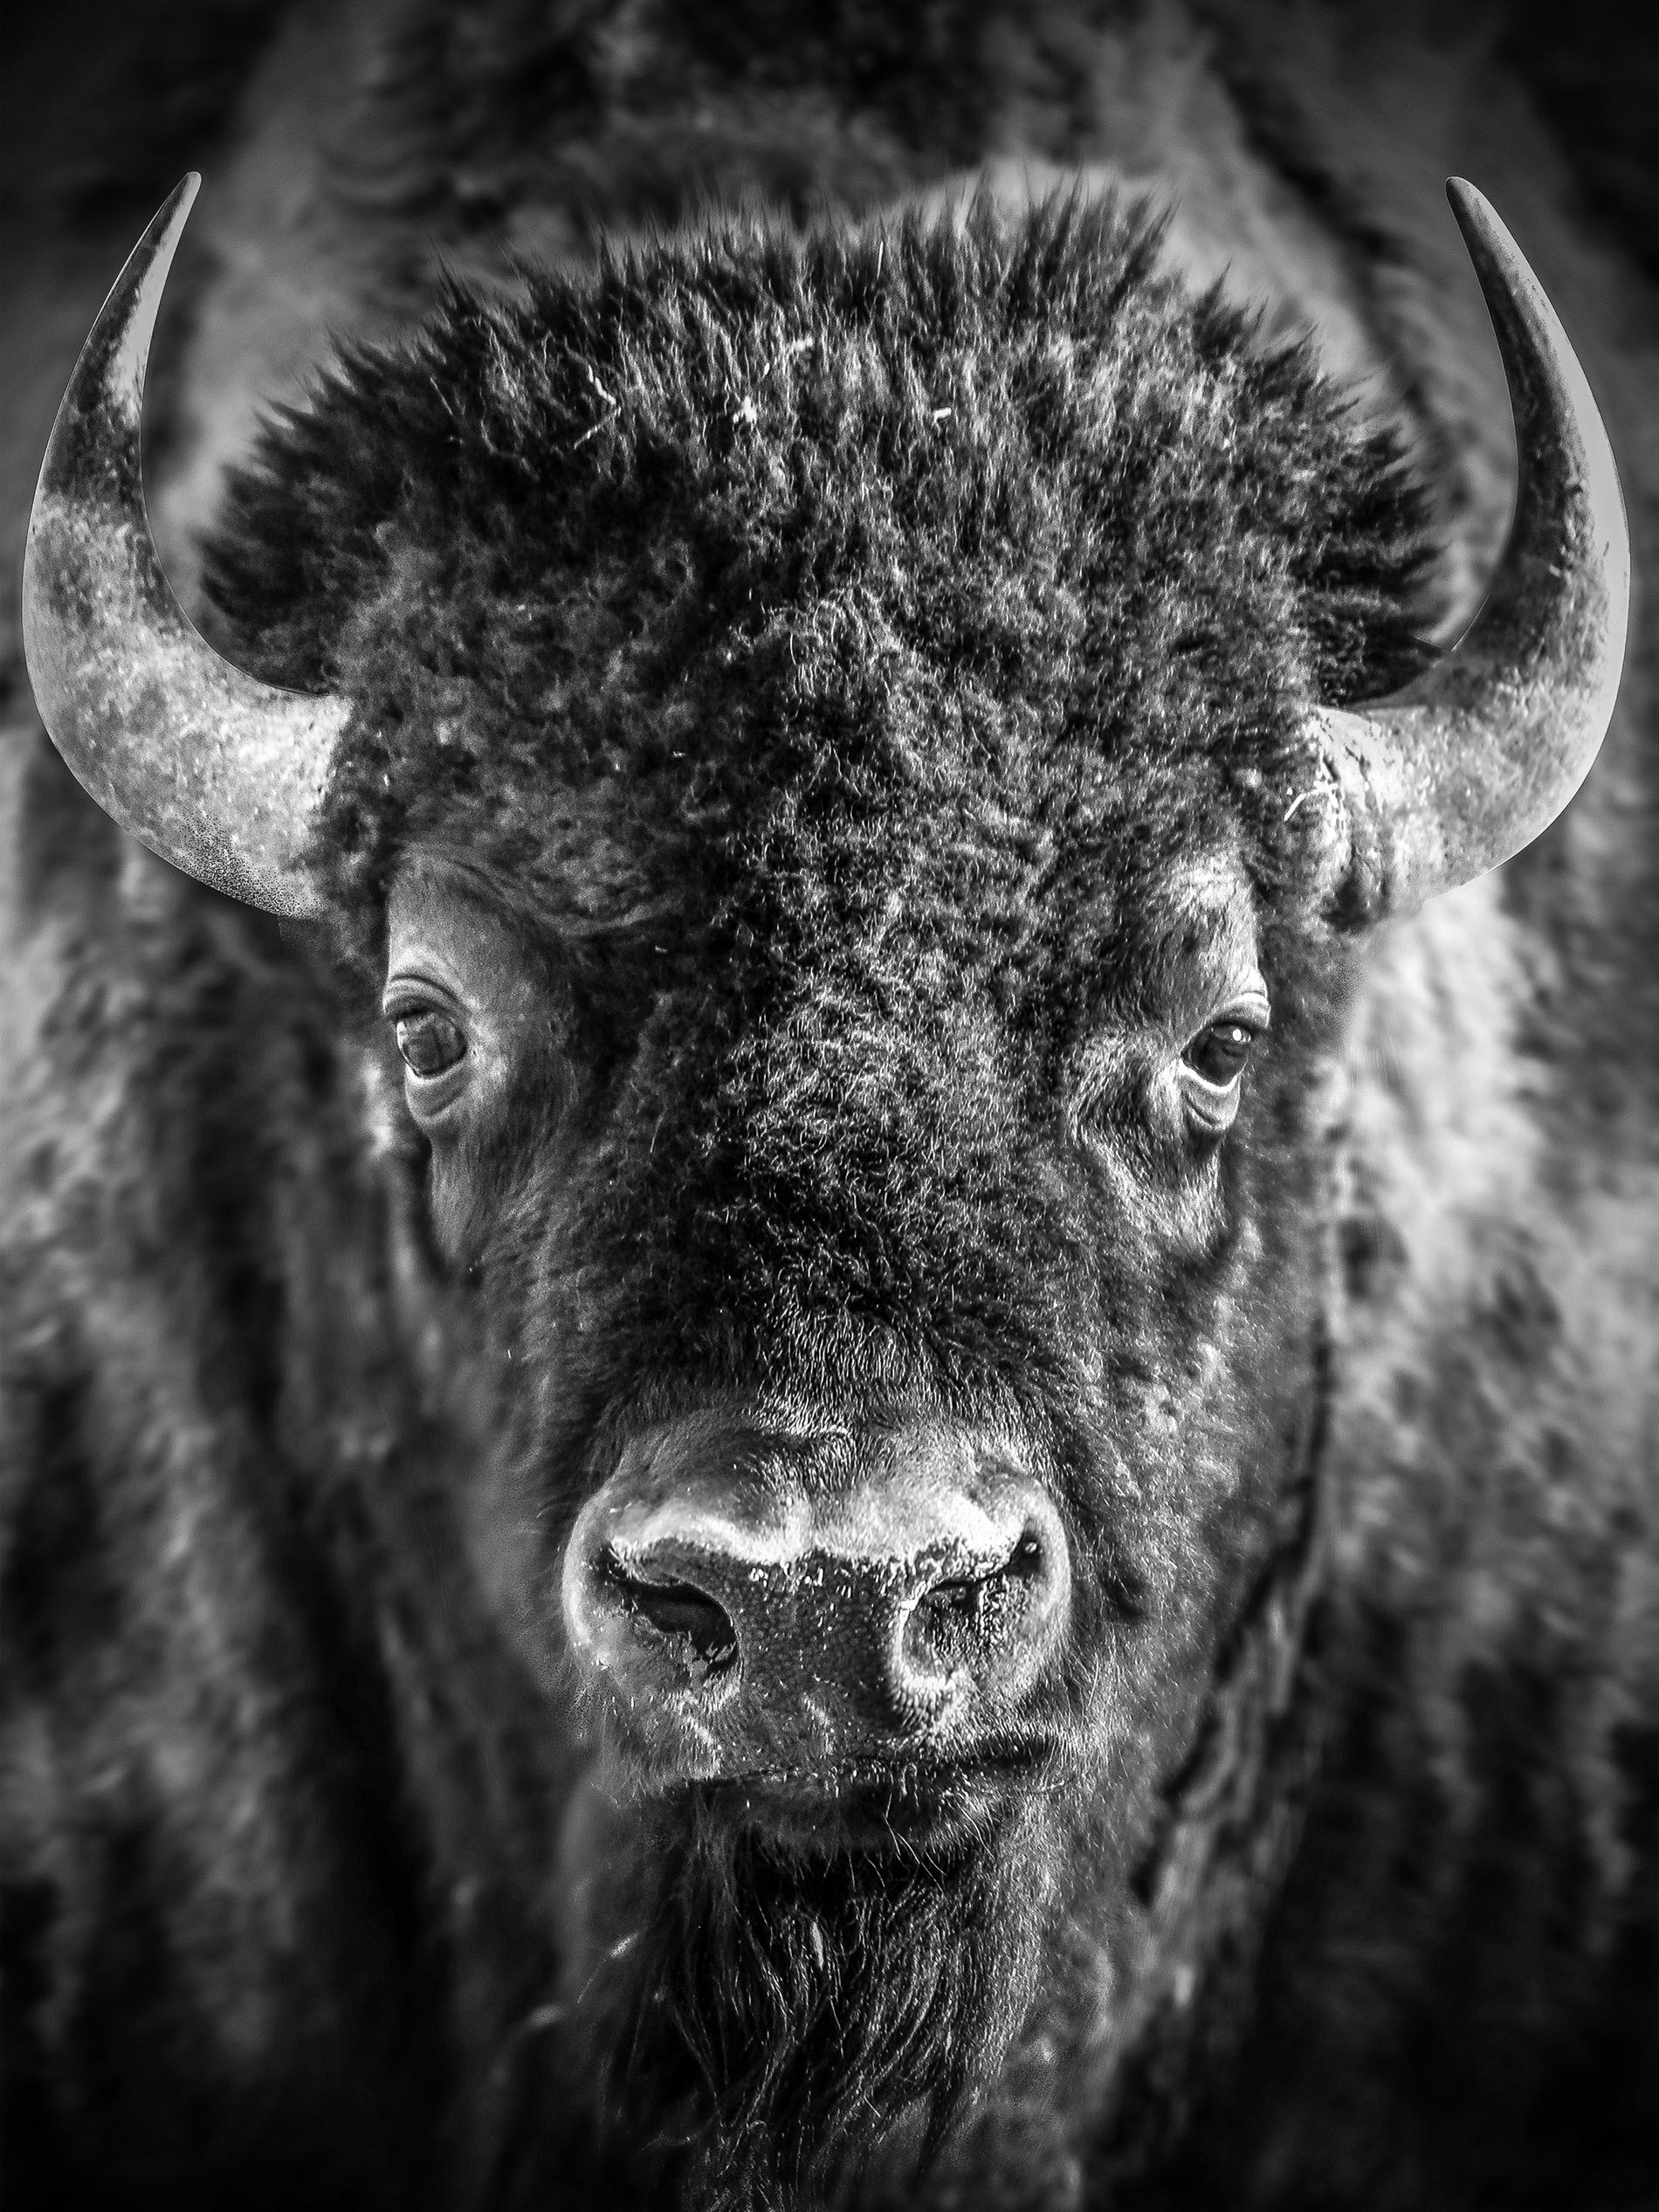  "Bison Portrait" 24x36- Black & White Photography, Buffalo, Wyoming Unsigned